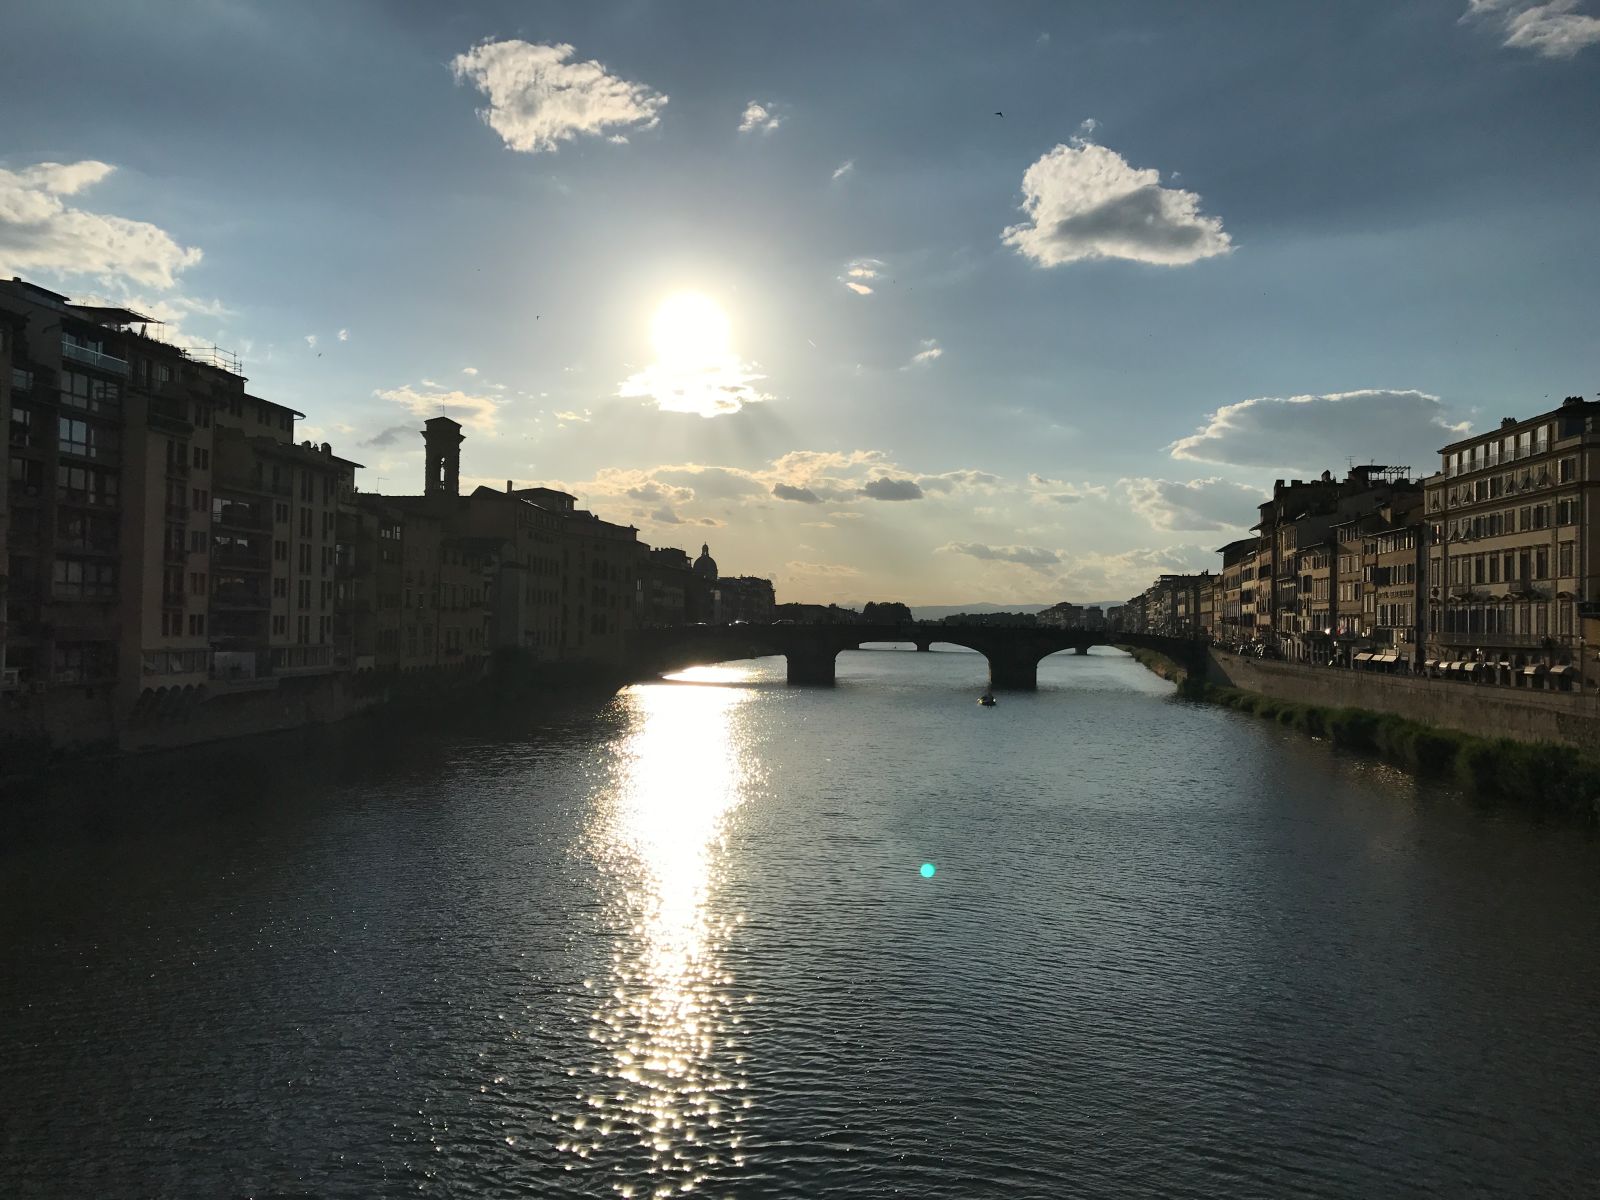 The Arno river flowing through the center of Florence at daybreak.